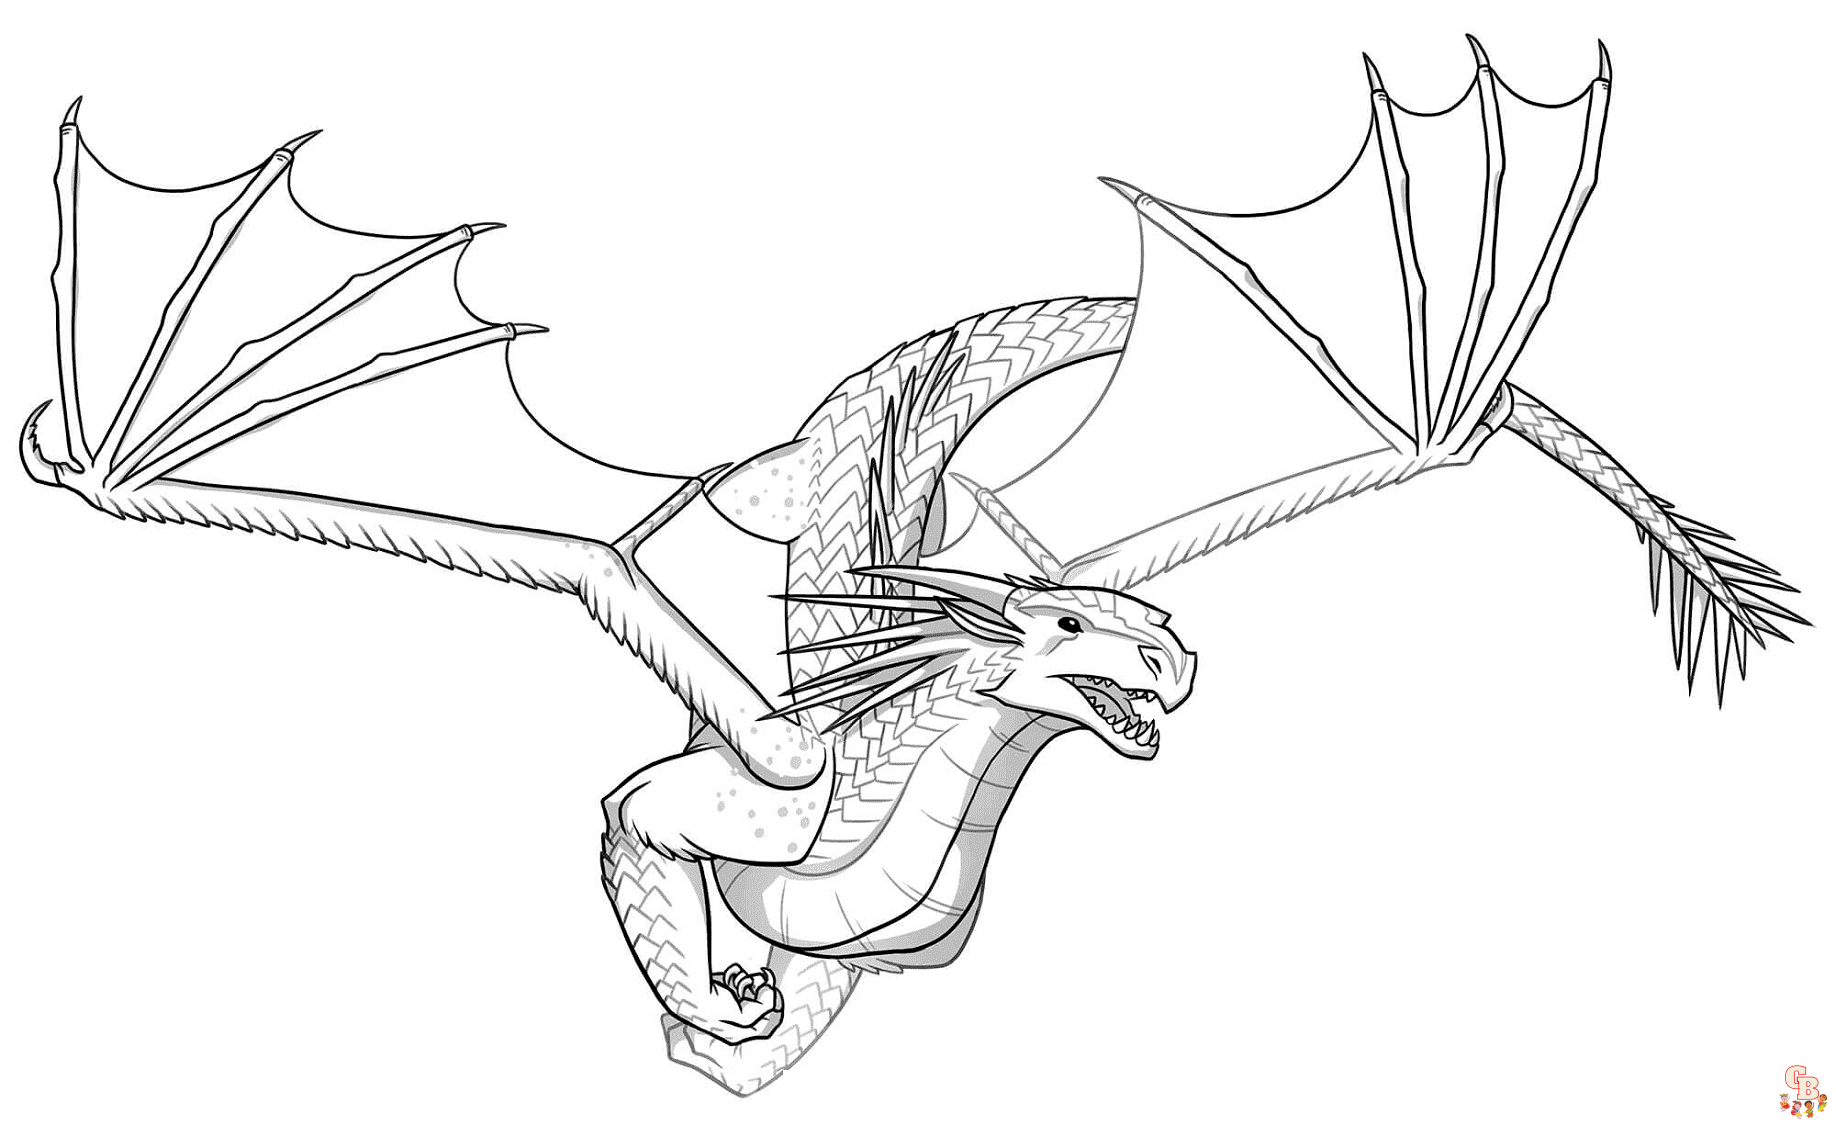 How to Draw a Dragon (Easy Tutorial) | Fotor